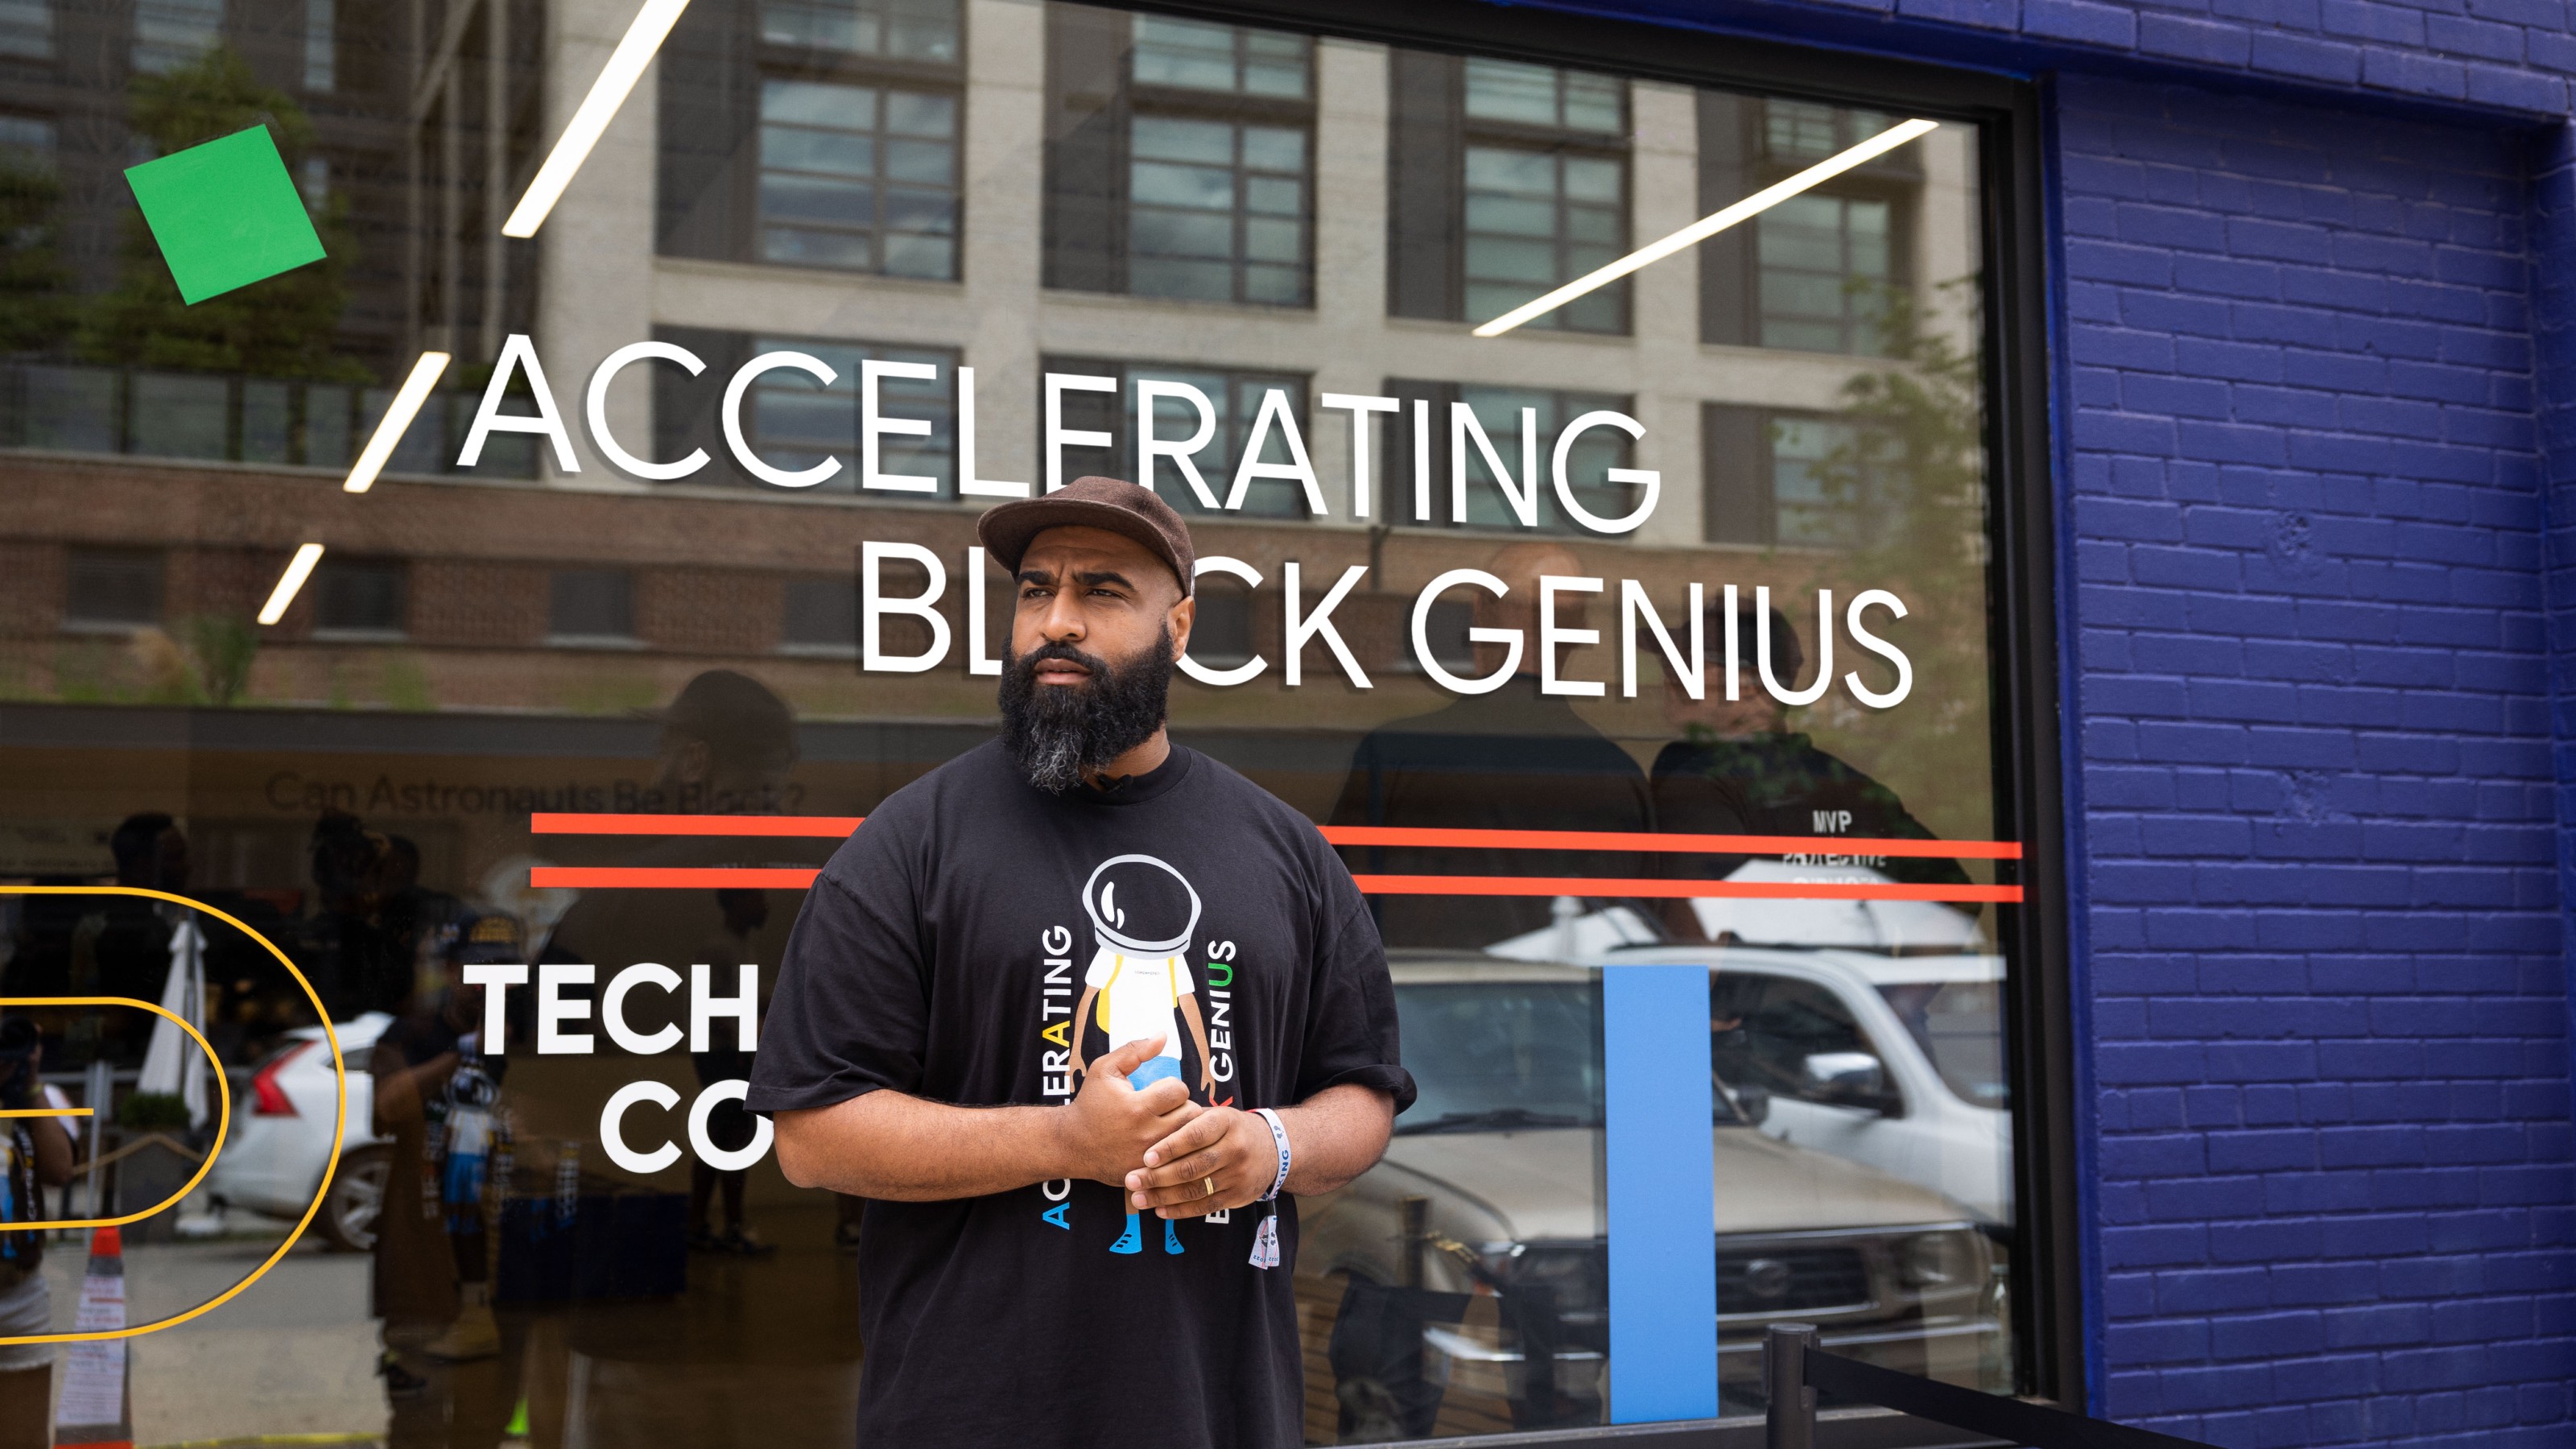 man in front of window that says “Accelerating Black Genuis”